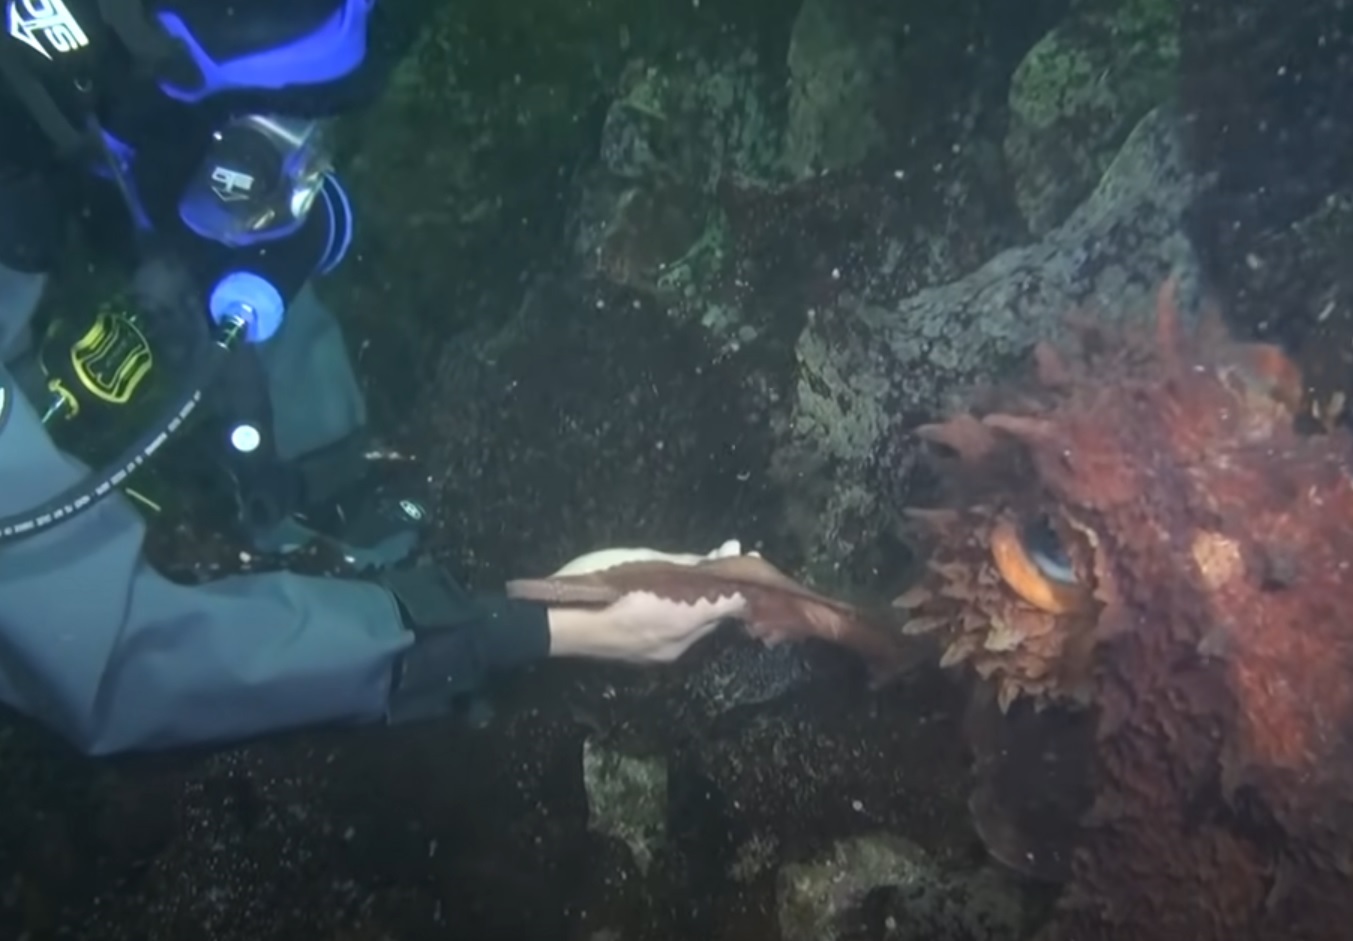 Man Offers Hand To Giant Octopus His Reaction Is Very Interesting